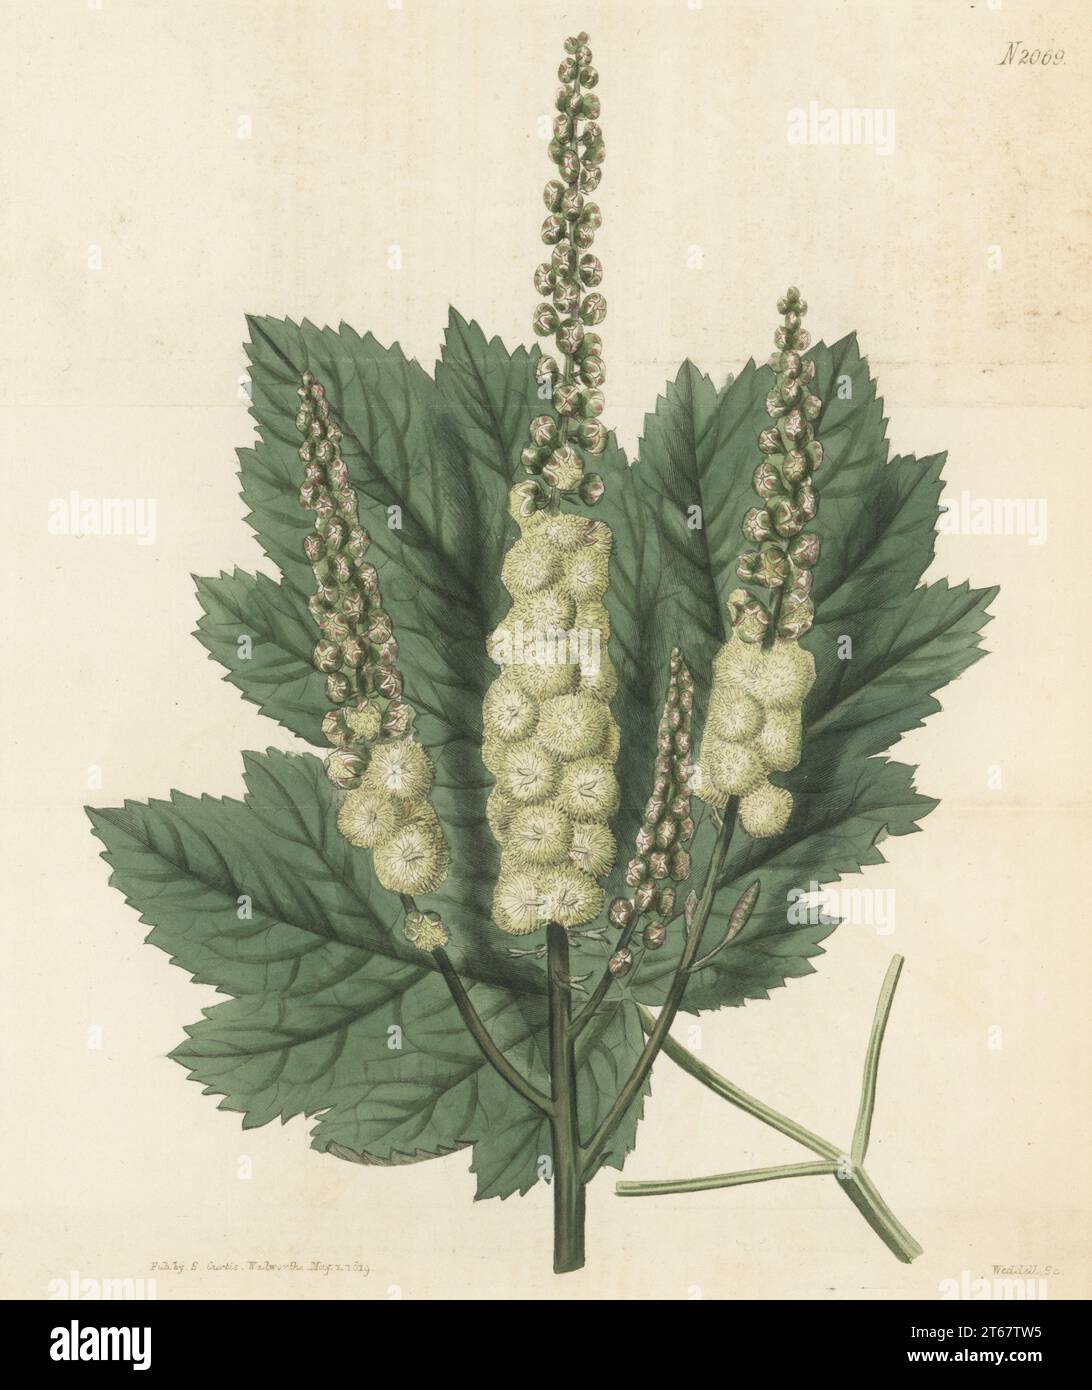 Mountain bugbane or mountain black-cohosh, Actaea podocarpa. Native of Carolina, introduced by John Fraser of Sloane Square. Heart-leaved bug-wort, Cimicifuga cordifolia. Handcoloured copperplate engraving by Weddell after a botanical illustration by an unknown artist from Curtis’s Botanical Magazine, edited by John Sims, London, 1819. Stock Photo